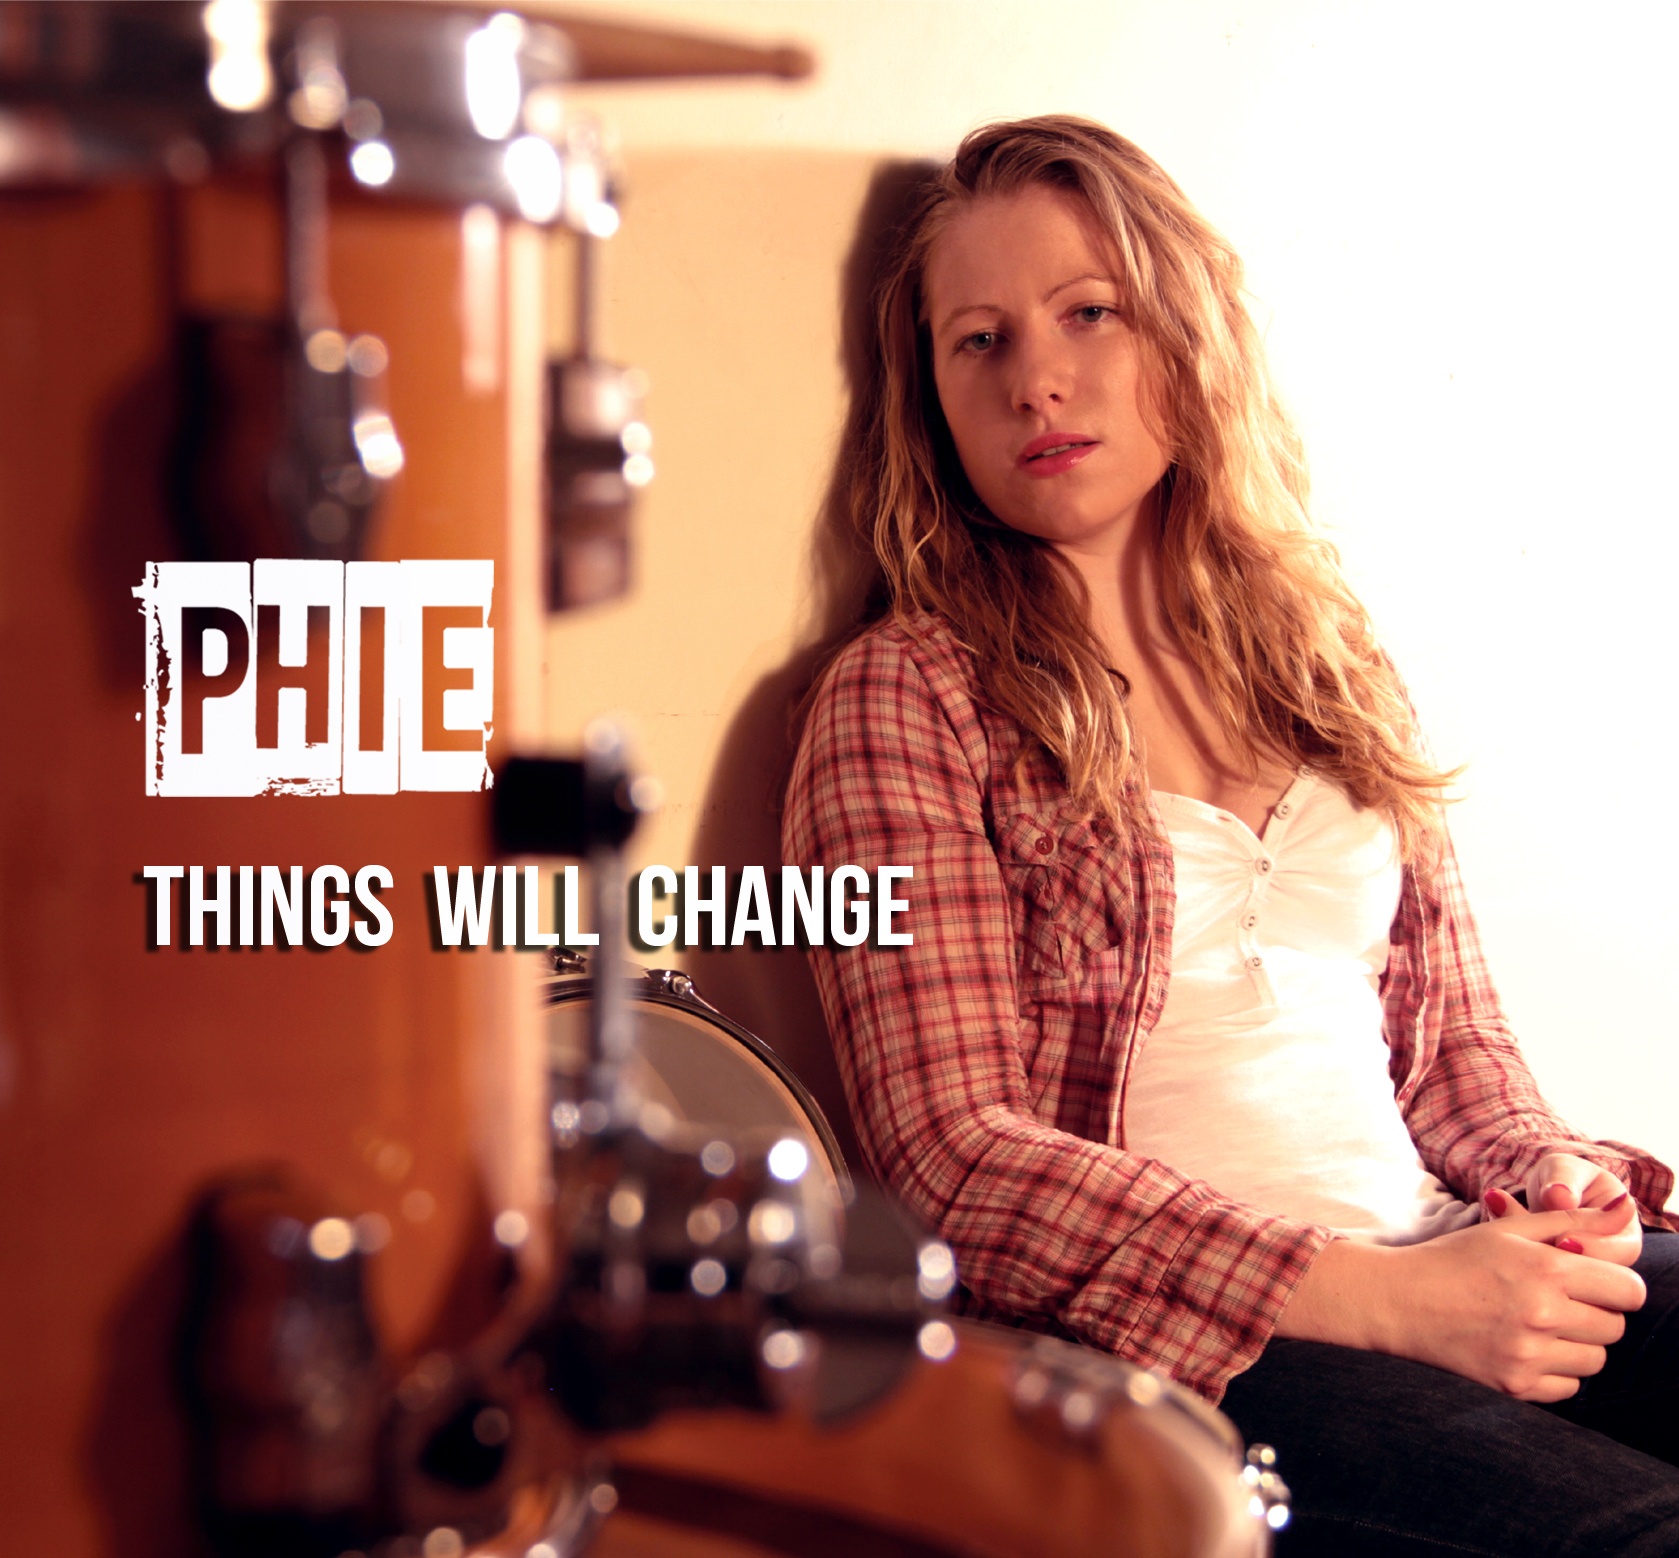 Phie - Things will change